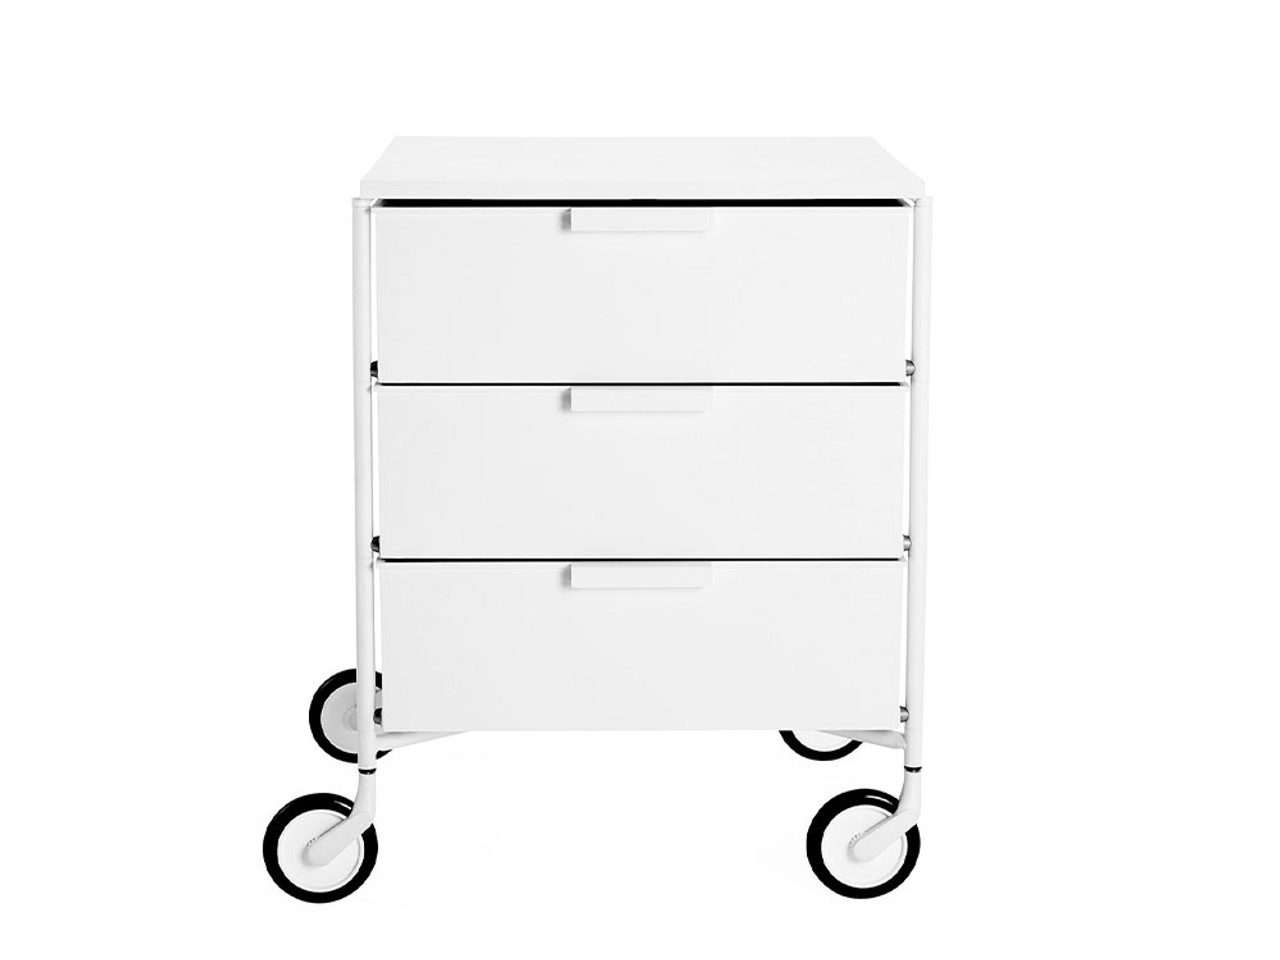 Kartell Mobil Mat Chest of Drawers by Antonio Citterio and Oliver Löw